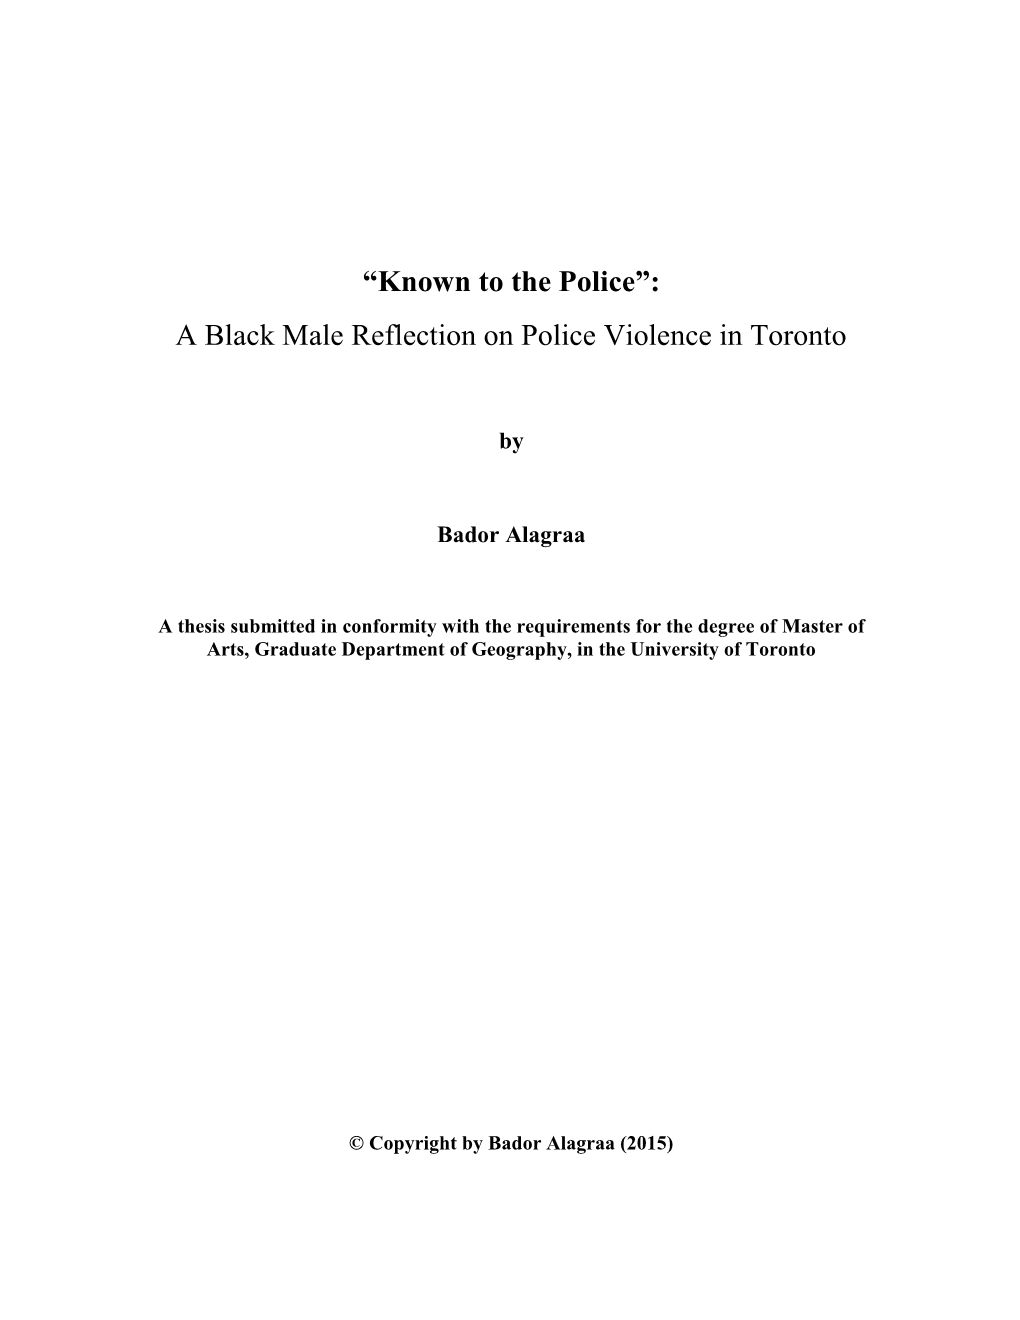 A Black Male Reflection on Police Violence in Toronto